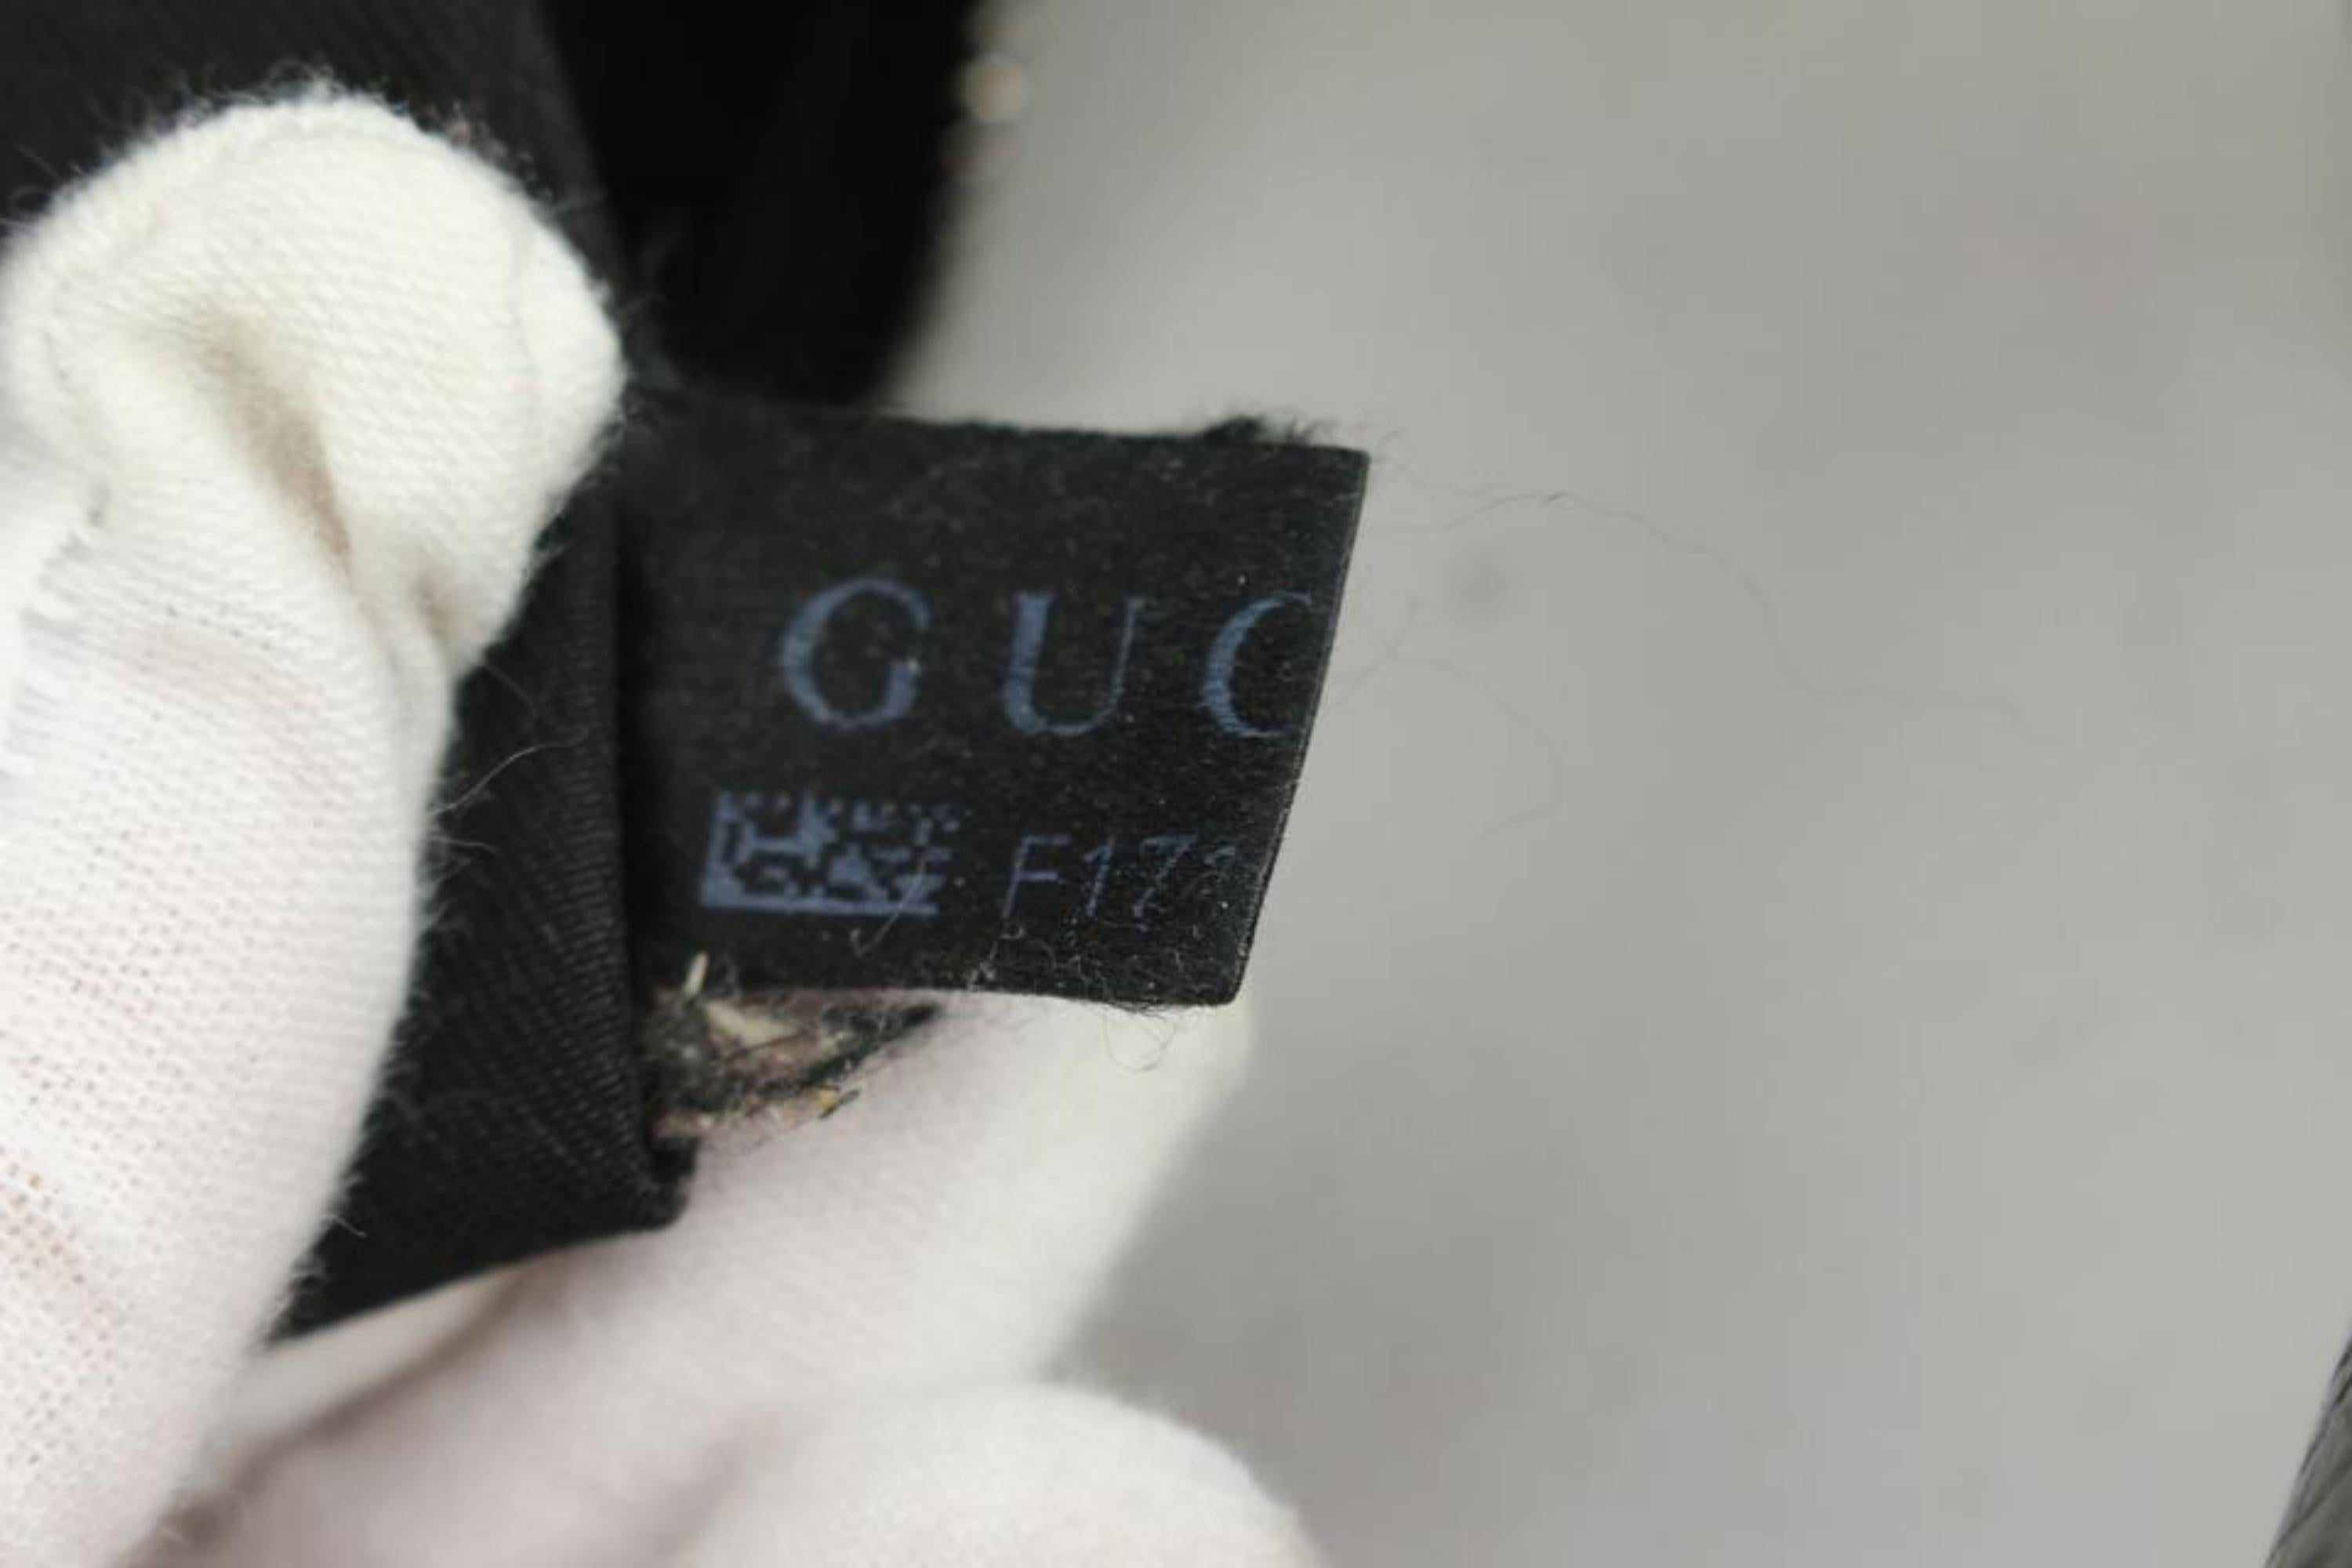 Gucci Black Monogram GG Horsebit Hobo Bag 5G113 In Fair Condition For Sale In Dix hills, NY